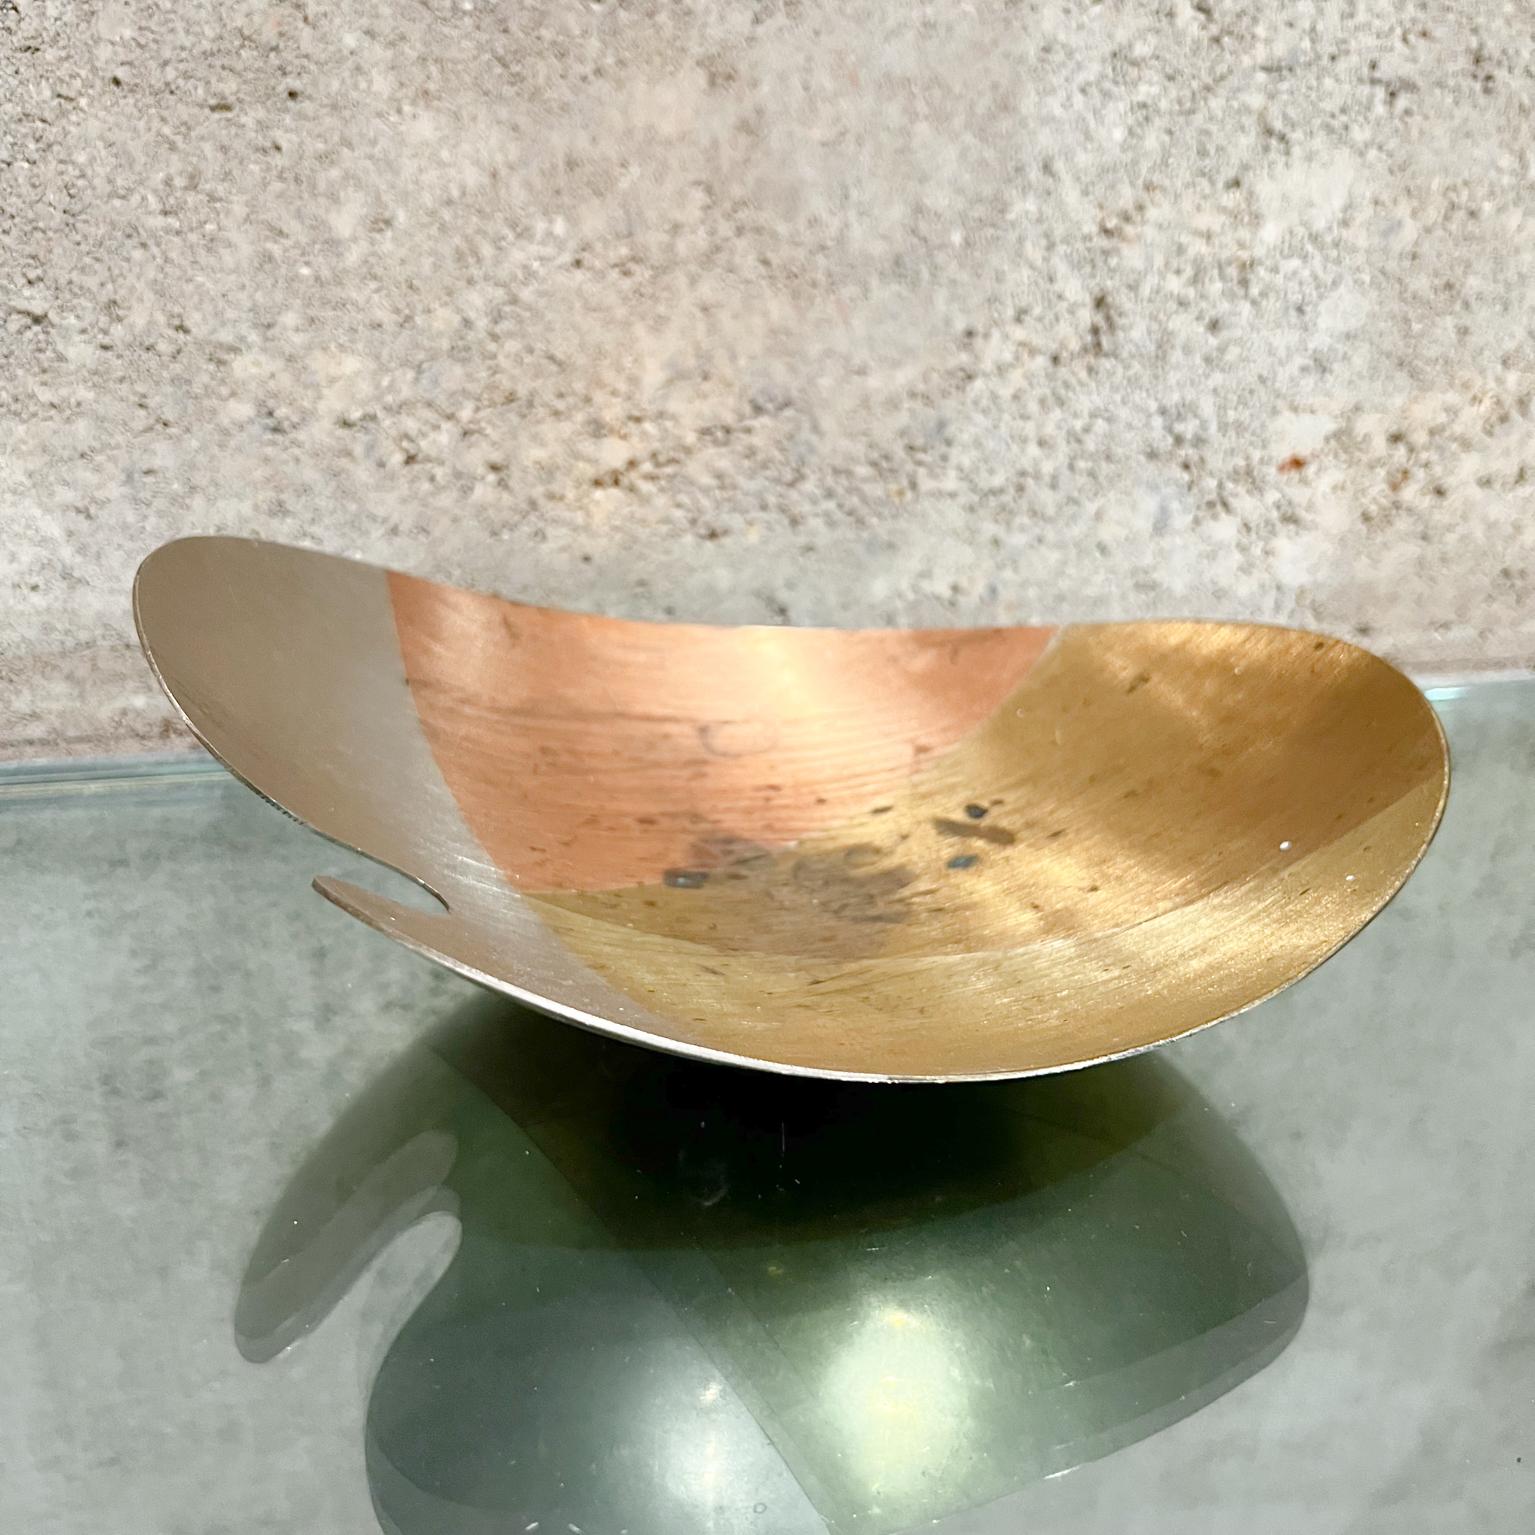 1970s Modernism Mexico organic footed metal dish.
Measures: 2.75 tall x 8.5 wide x 6.5 deep
Married metals dish, organic shape. Mounted on three balls.
No markings present. Made in Mexico, circa 1970s.
Vintage patina. Not new. Unrestored.